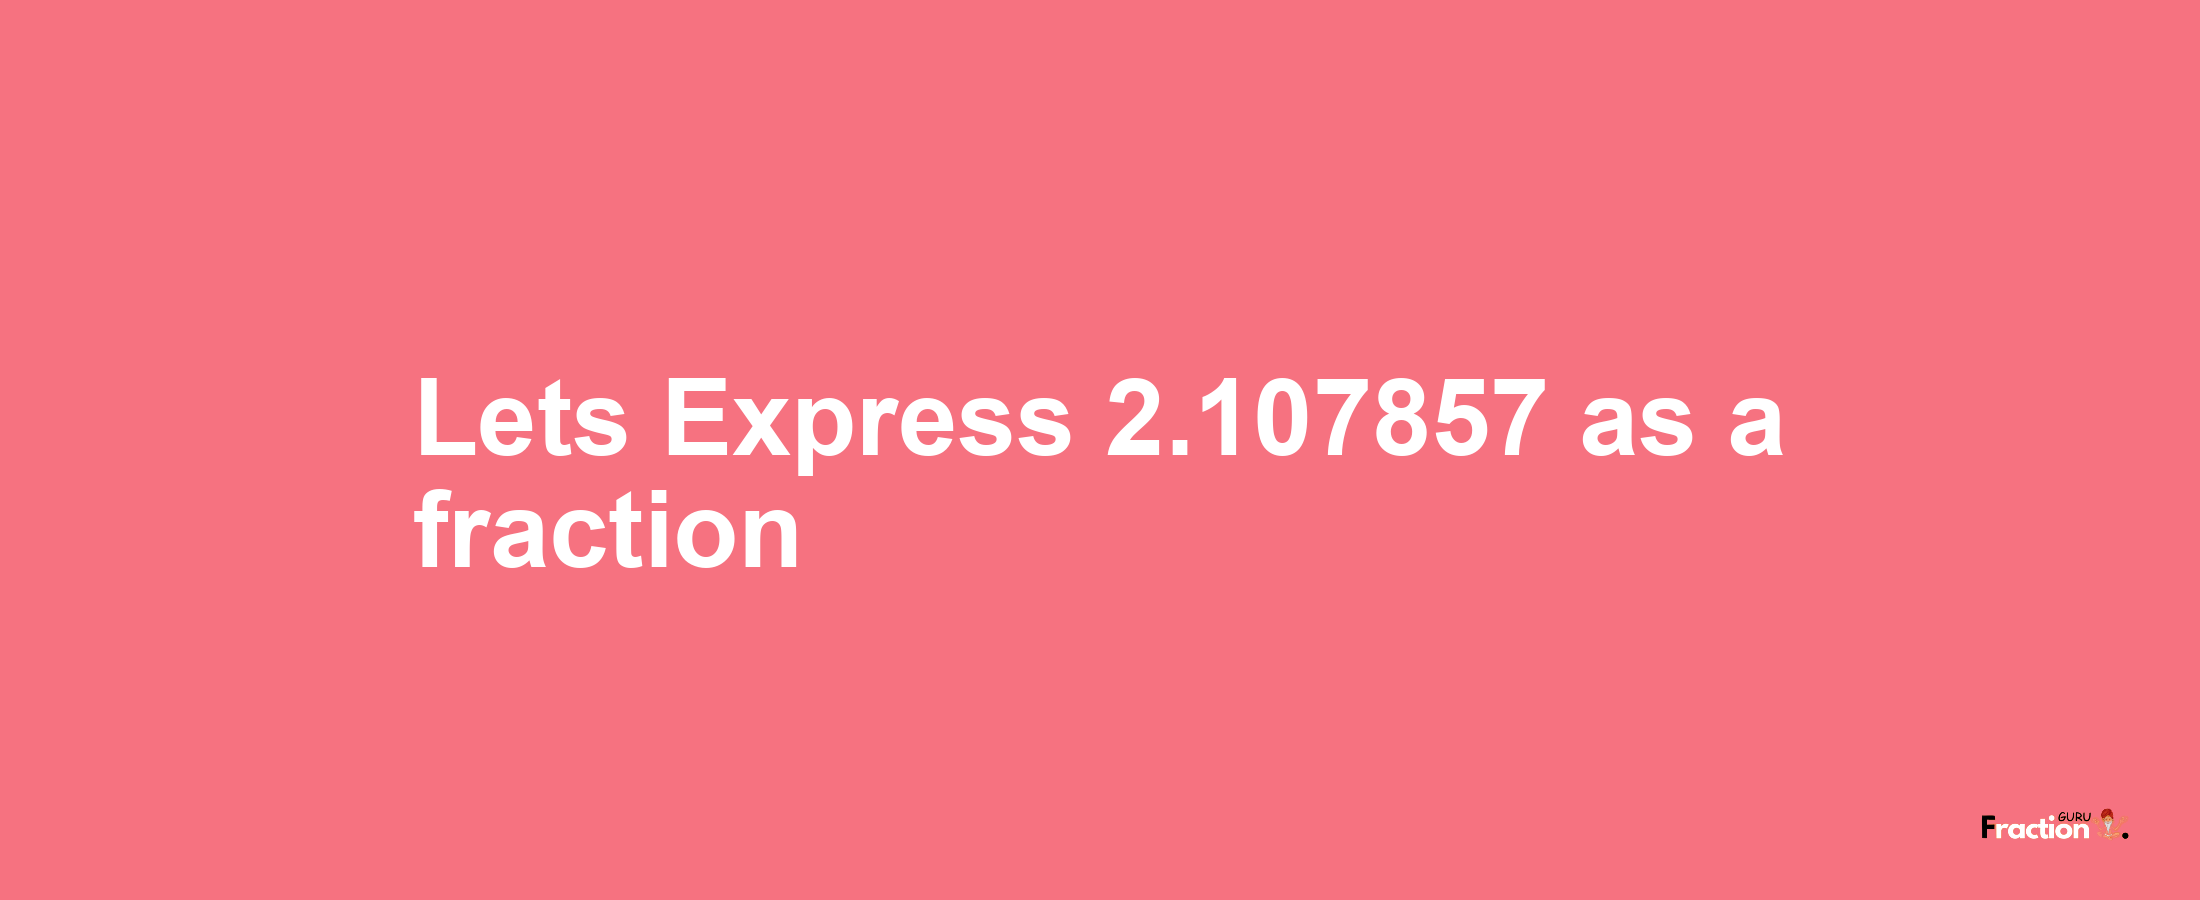 Lets Express 2.107857 as afraction